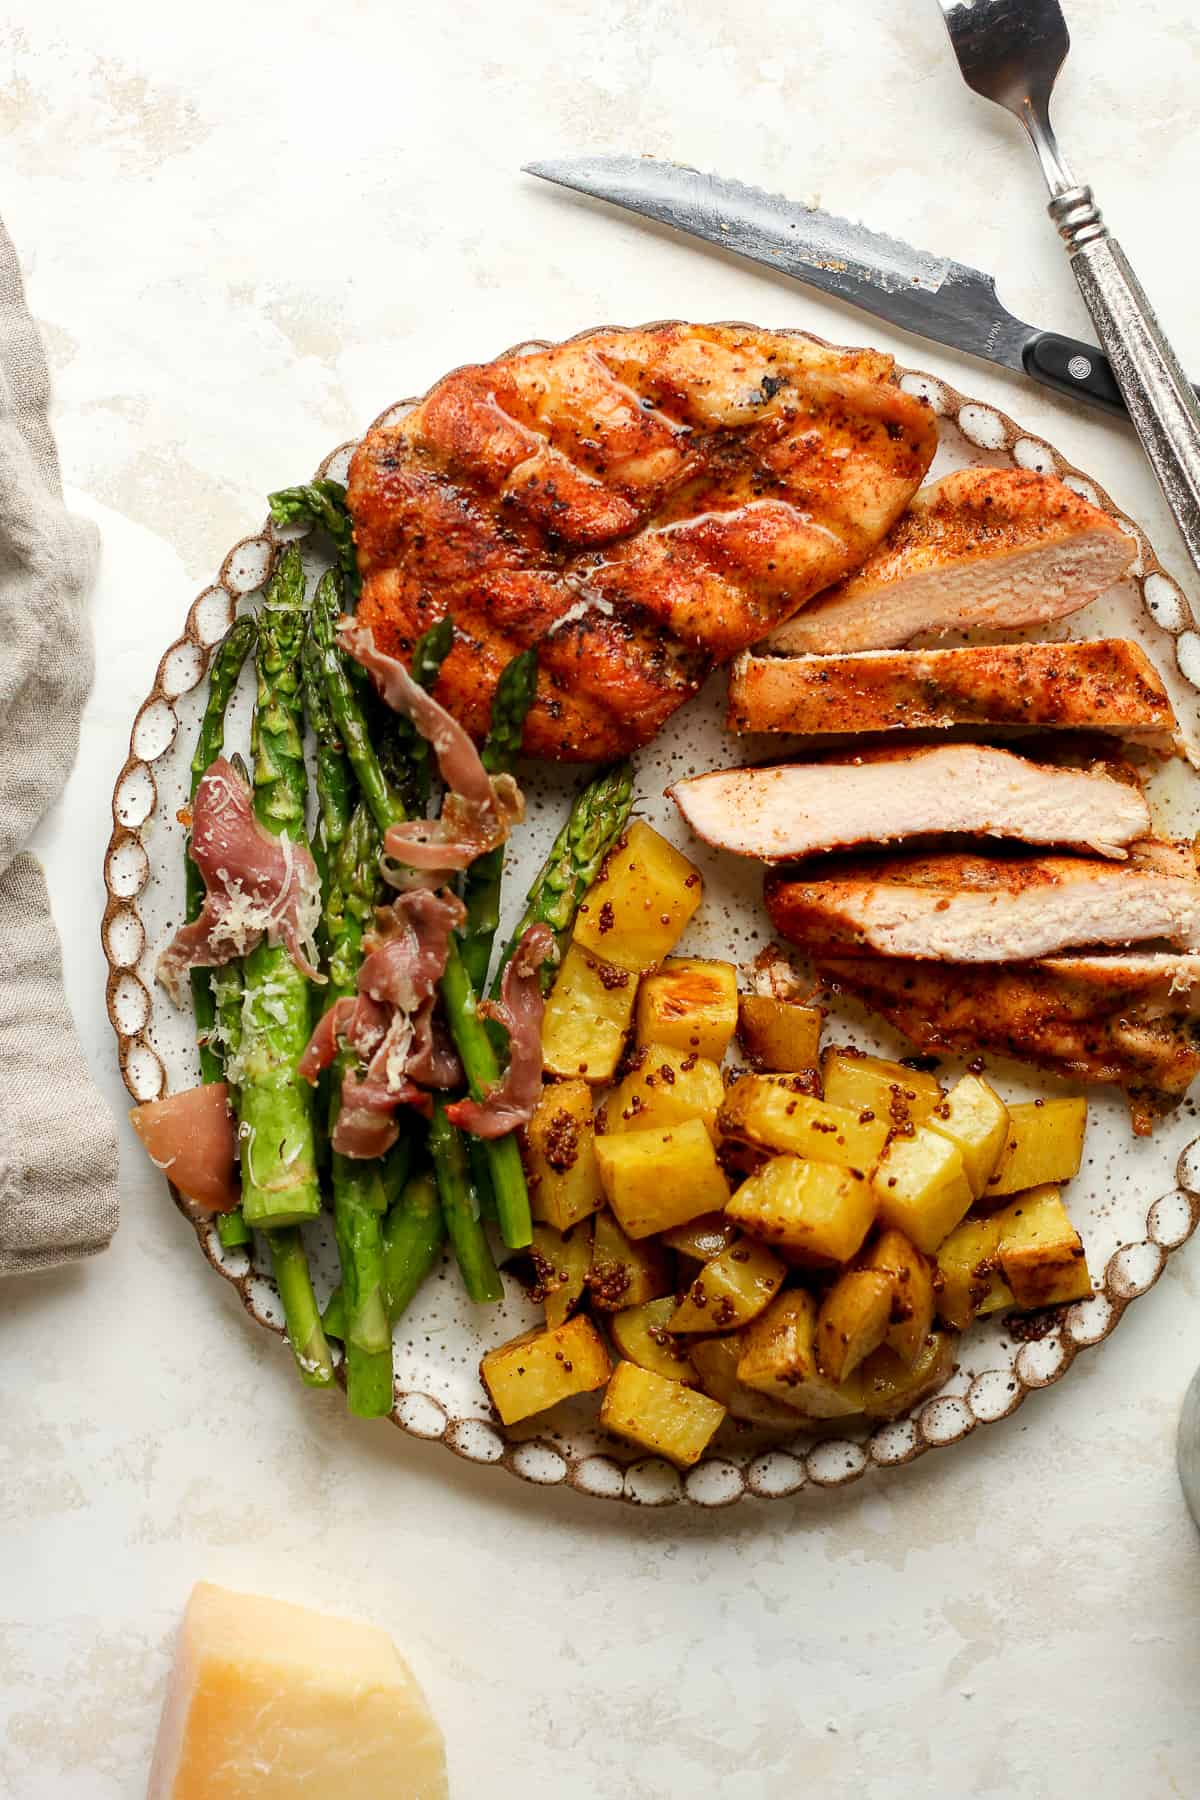 Overhead view of a plate of dinner, including smoked chicken, asparagus, and mustard potatoes.